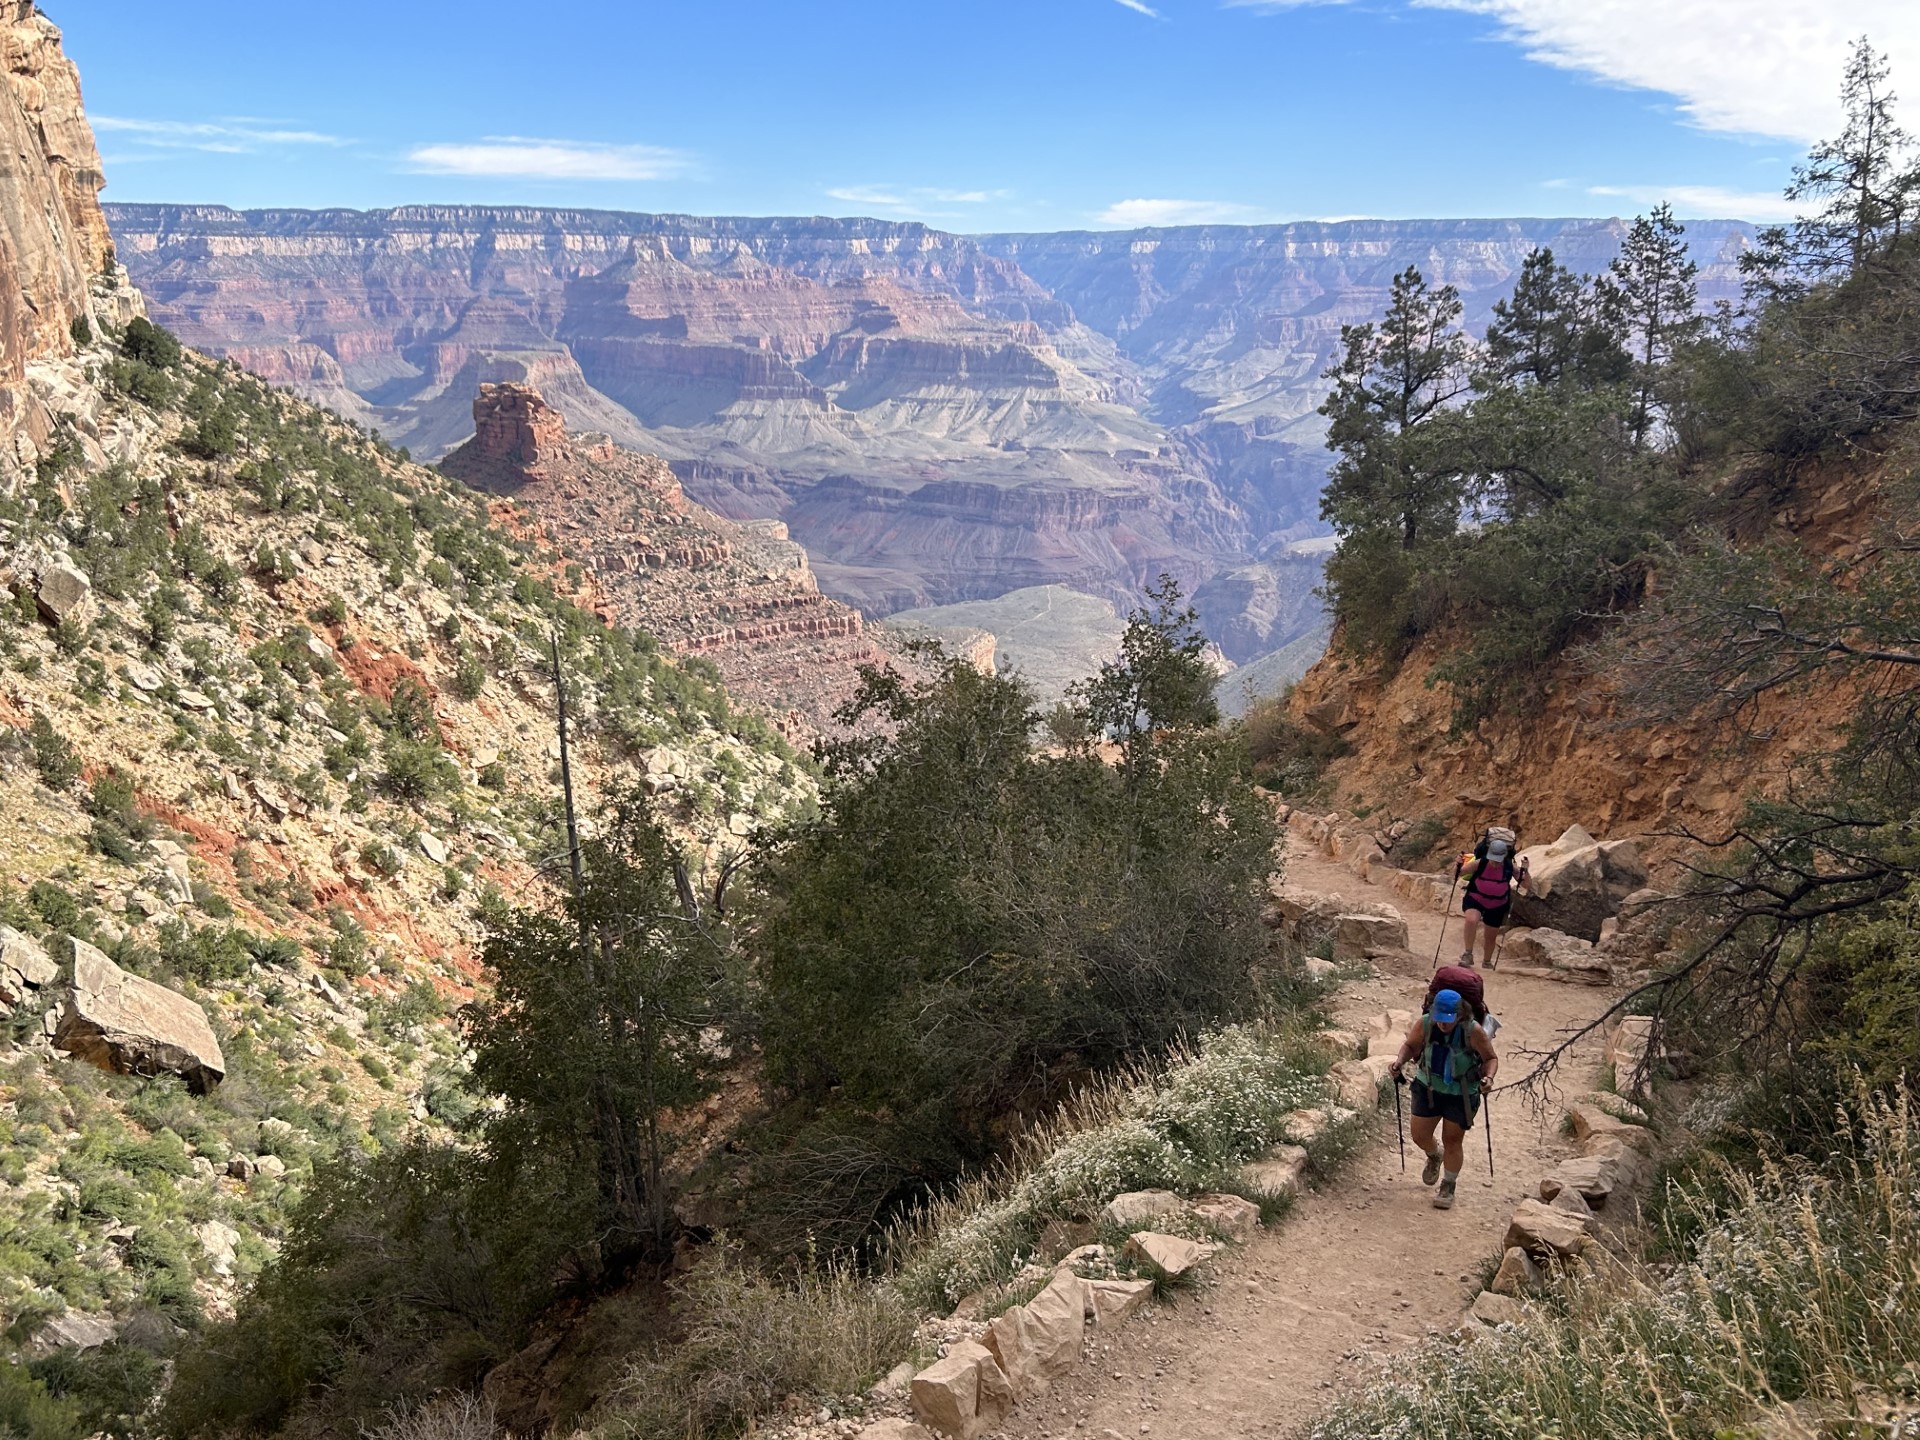 Two hikers ascend the Bright Angel Trail carrying heavy backpacks